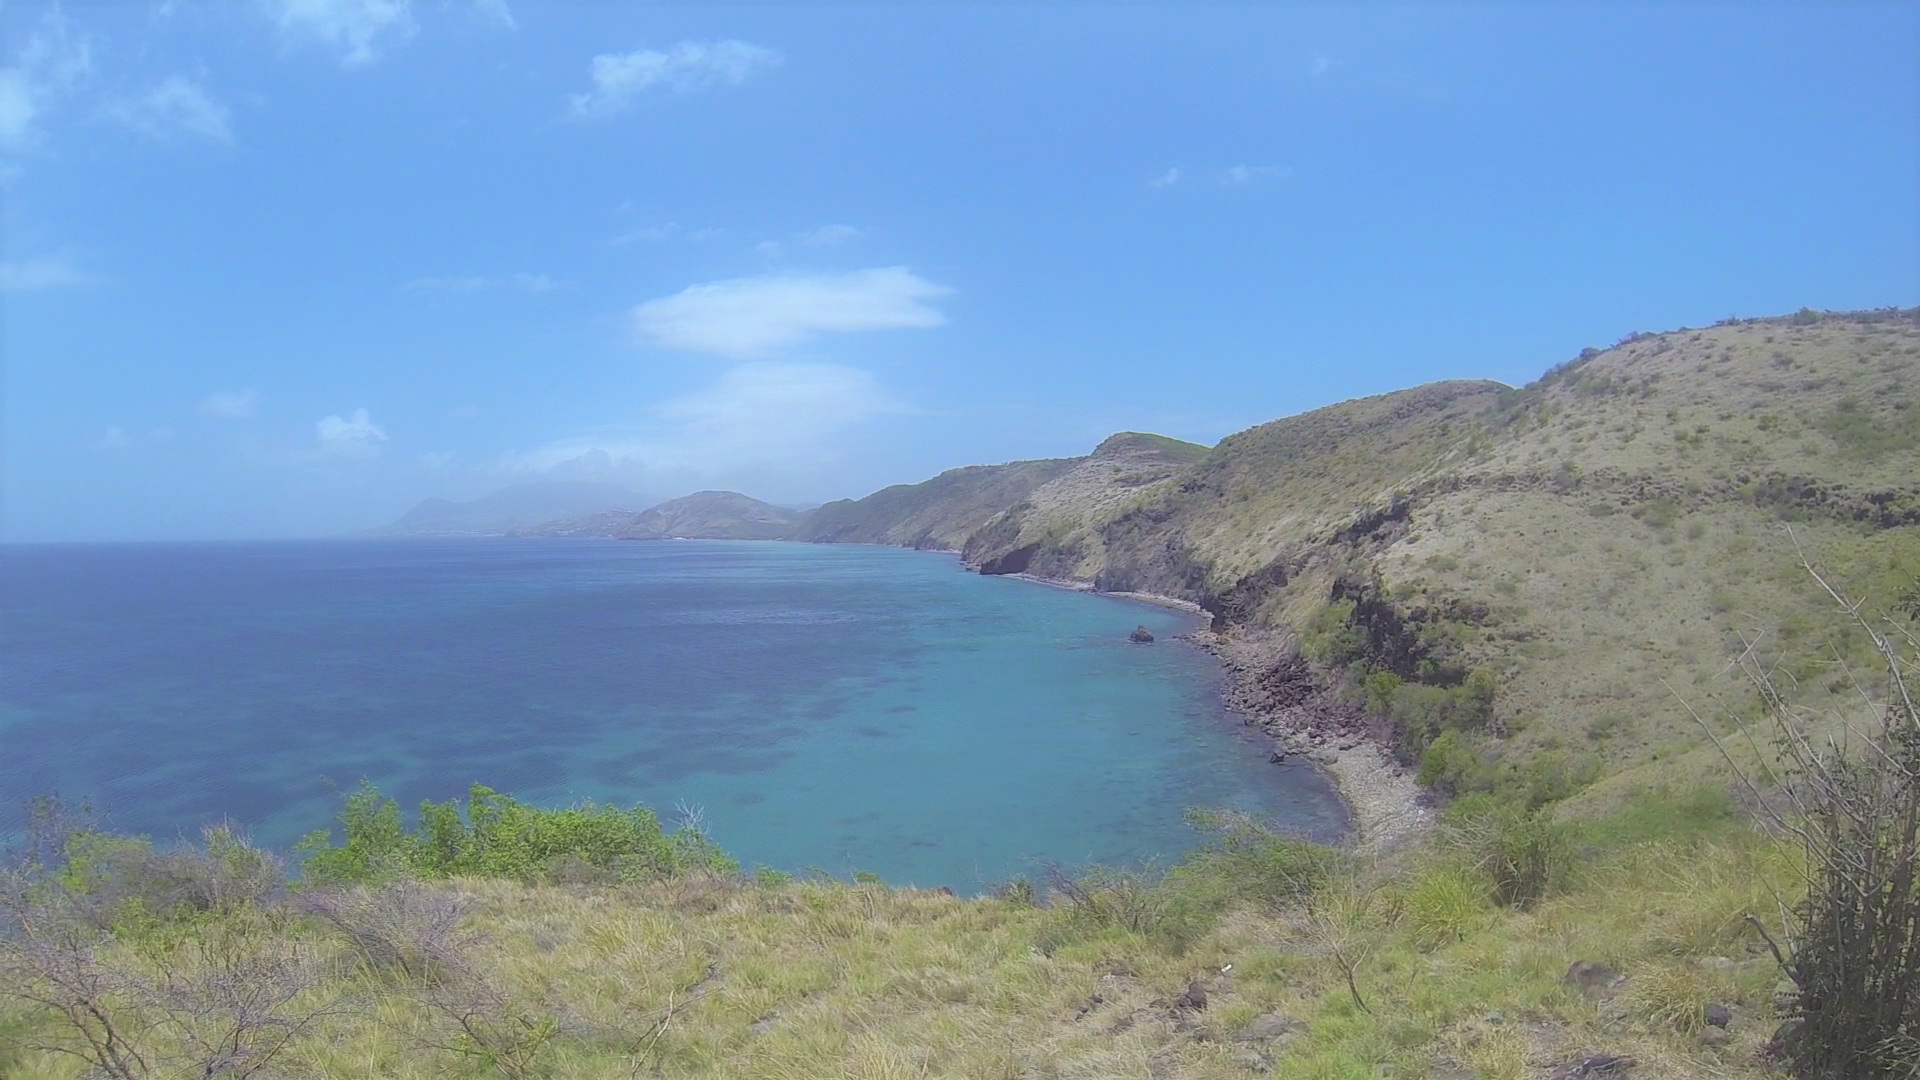 St Kitts and Nevis Snorkeling Guide